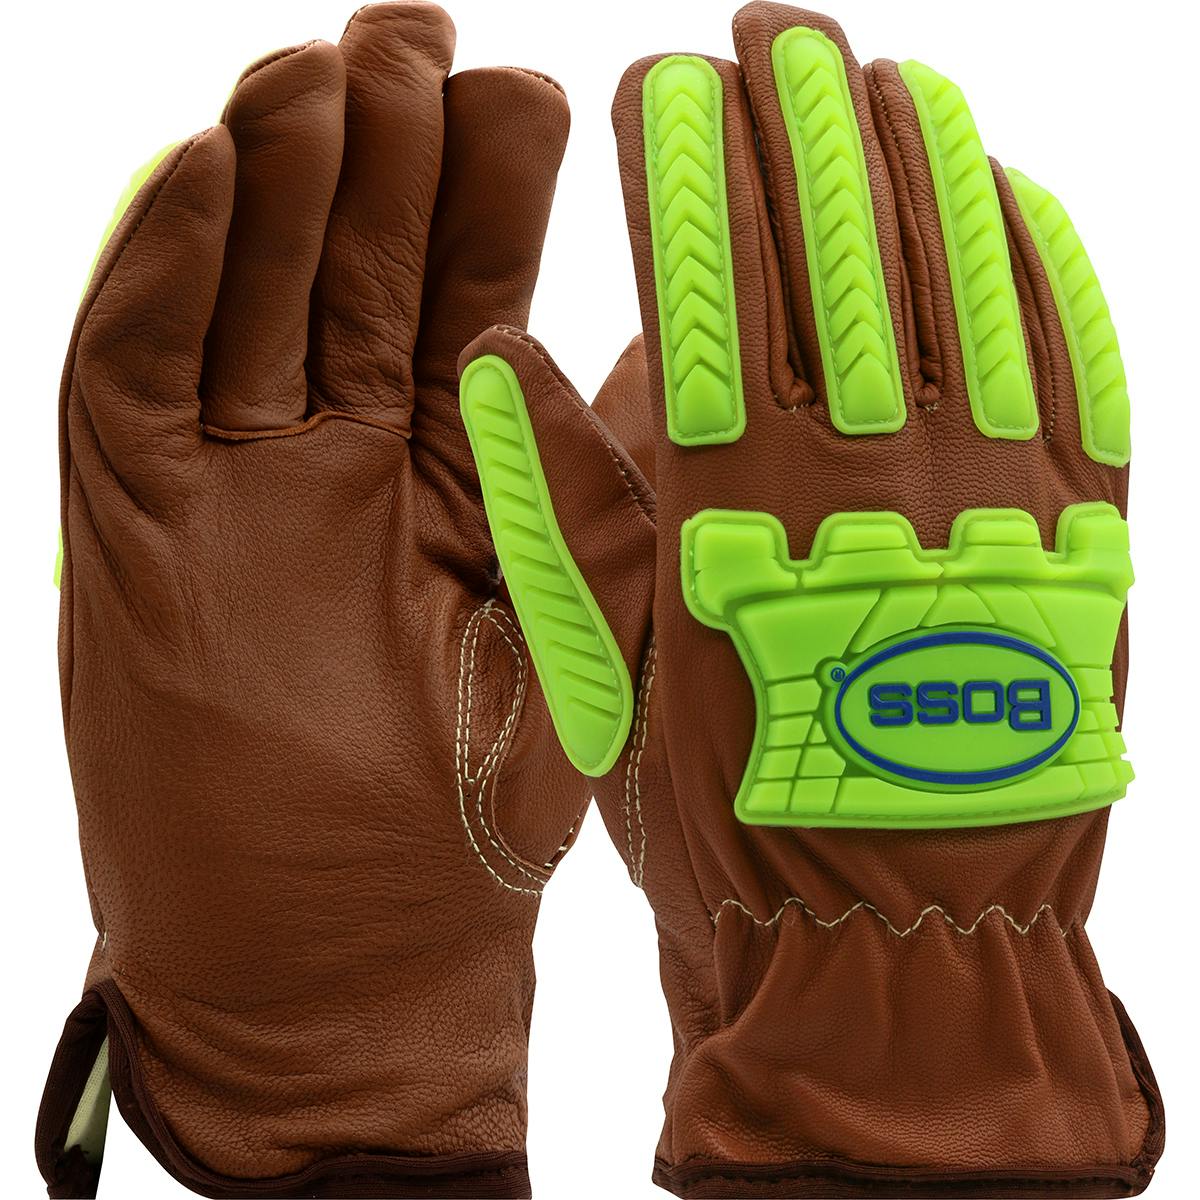 Boss® Xtreme AR Top Grain Goatskin Leather Drivers Glove with Oil Armor™ Finish and Para-Aramid Lining - TPR Impact Protection (KS993KOAB)